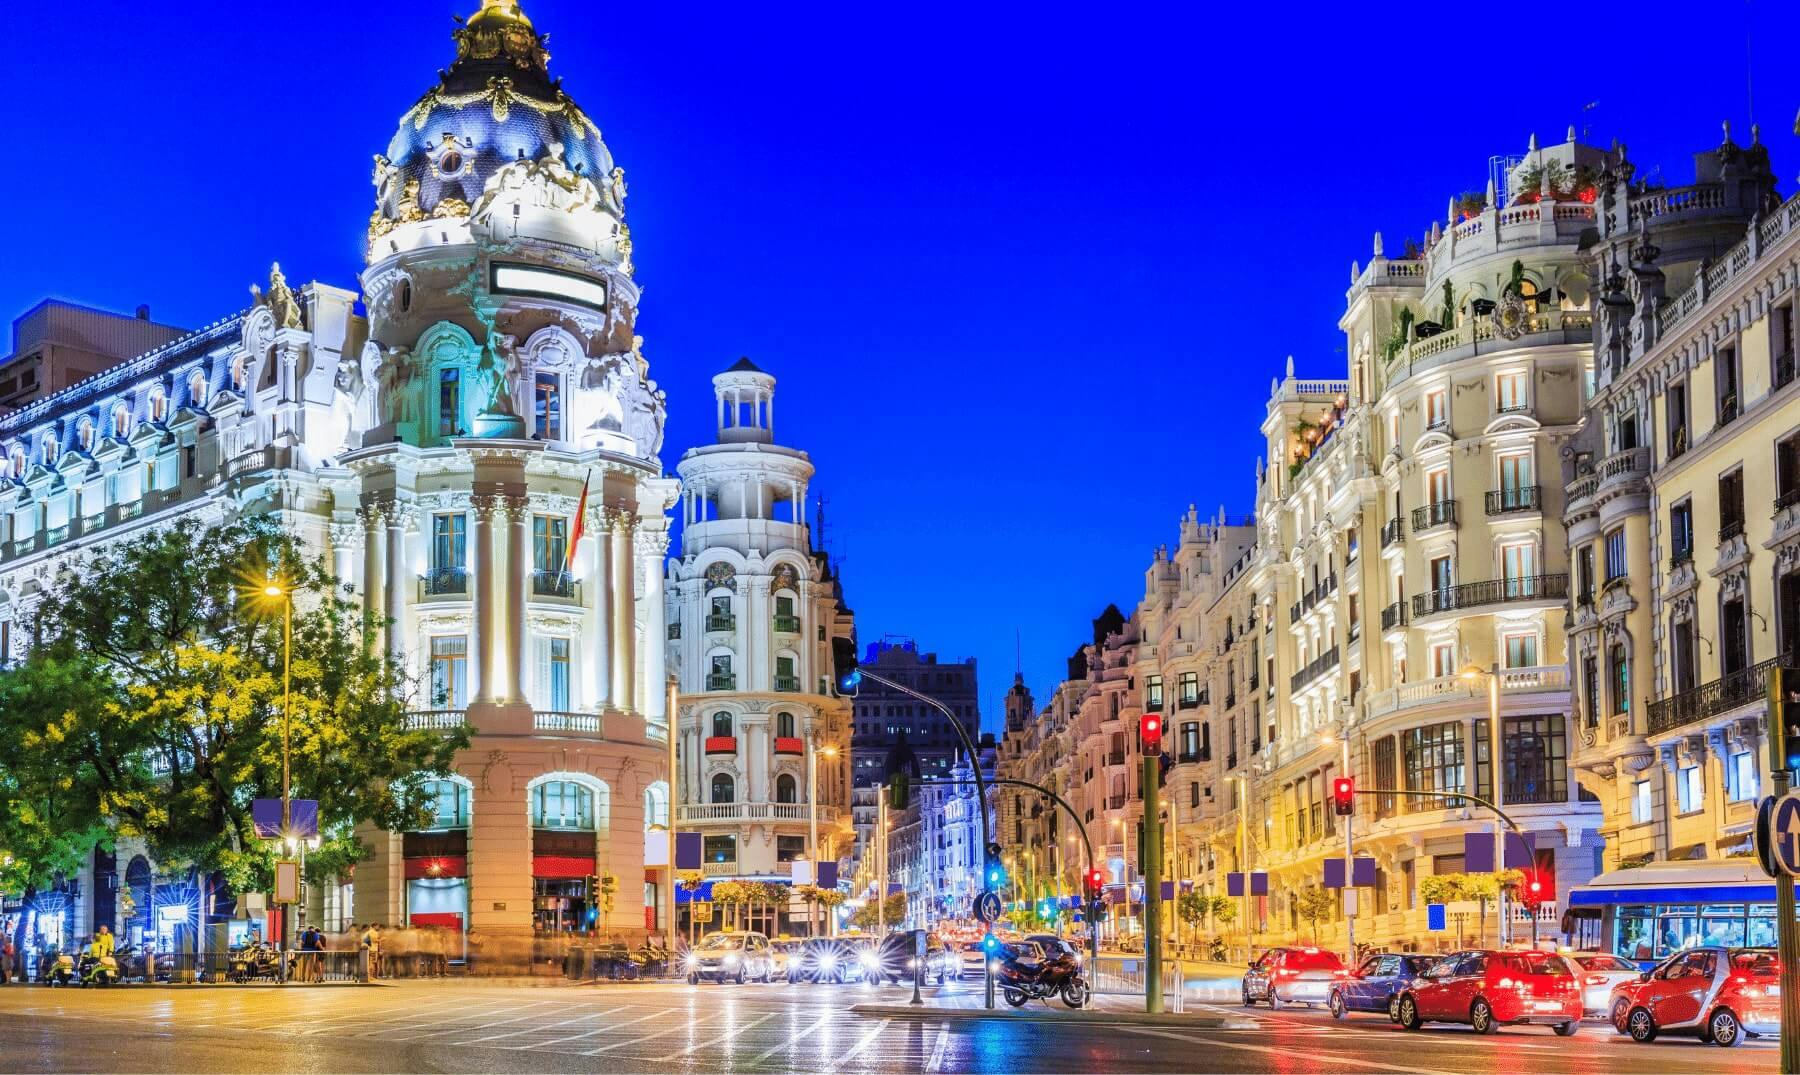 Work in Spain | Requirements, Salaries, and Job Search Tips